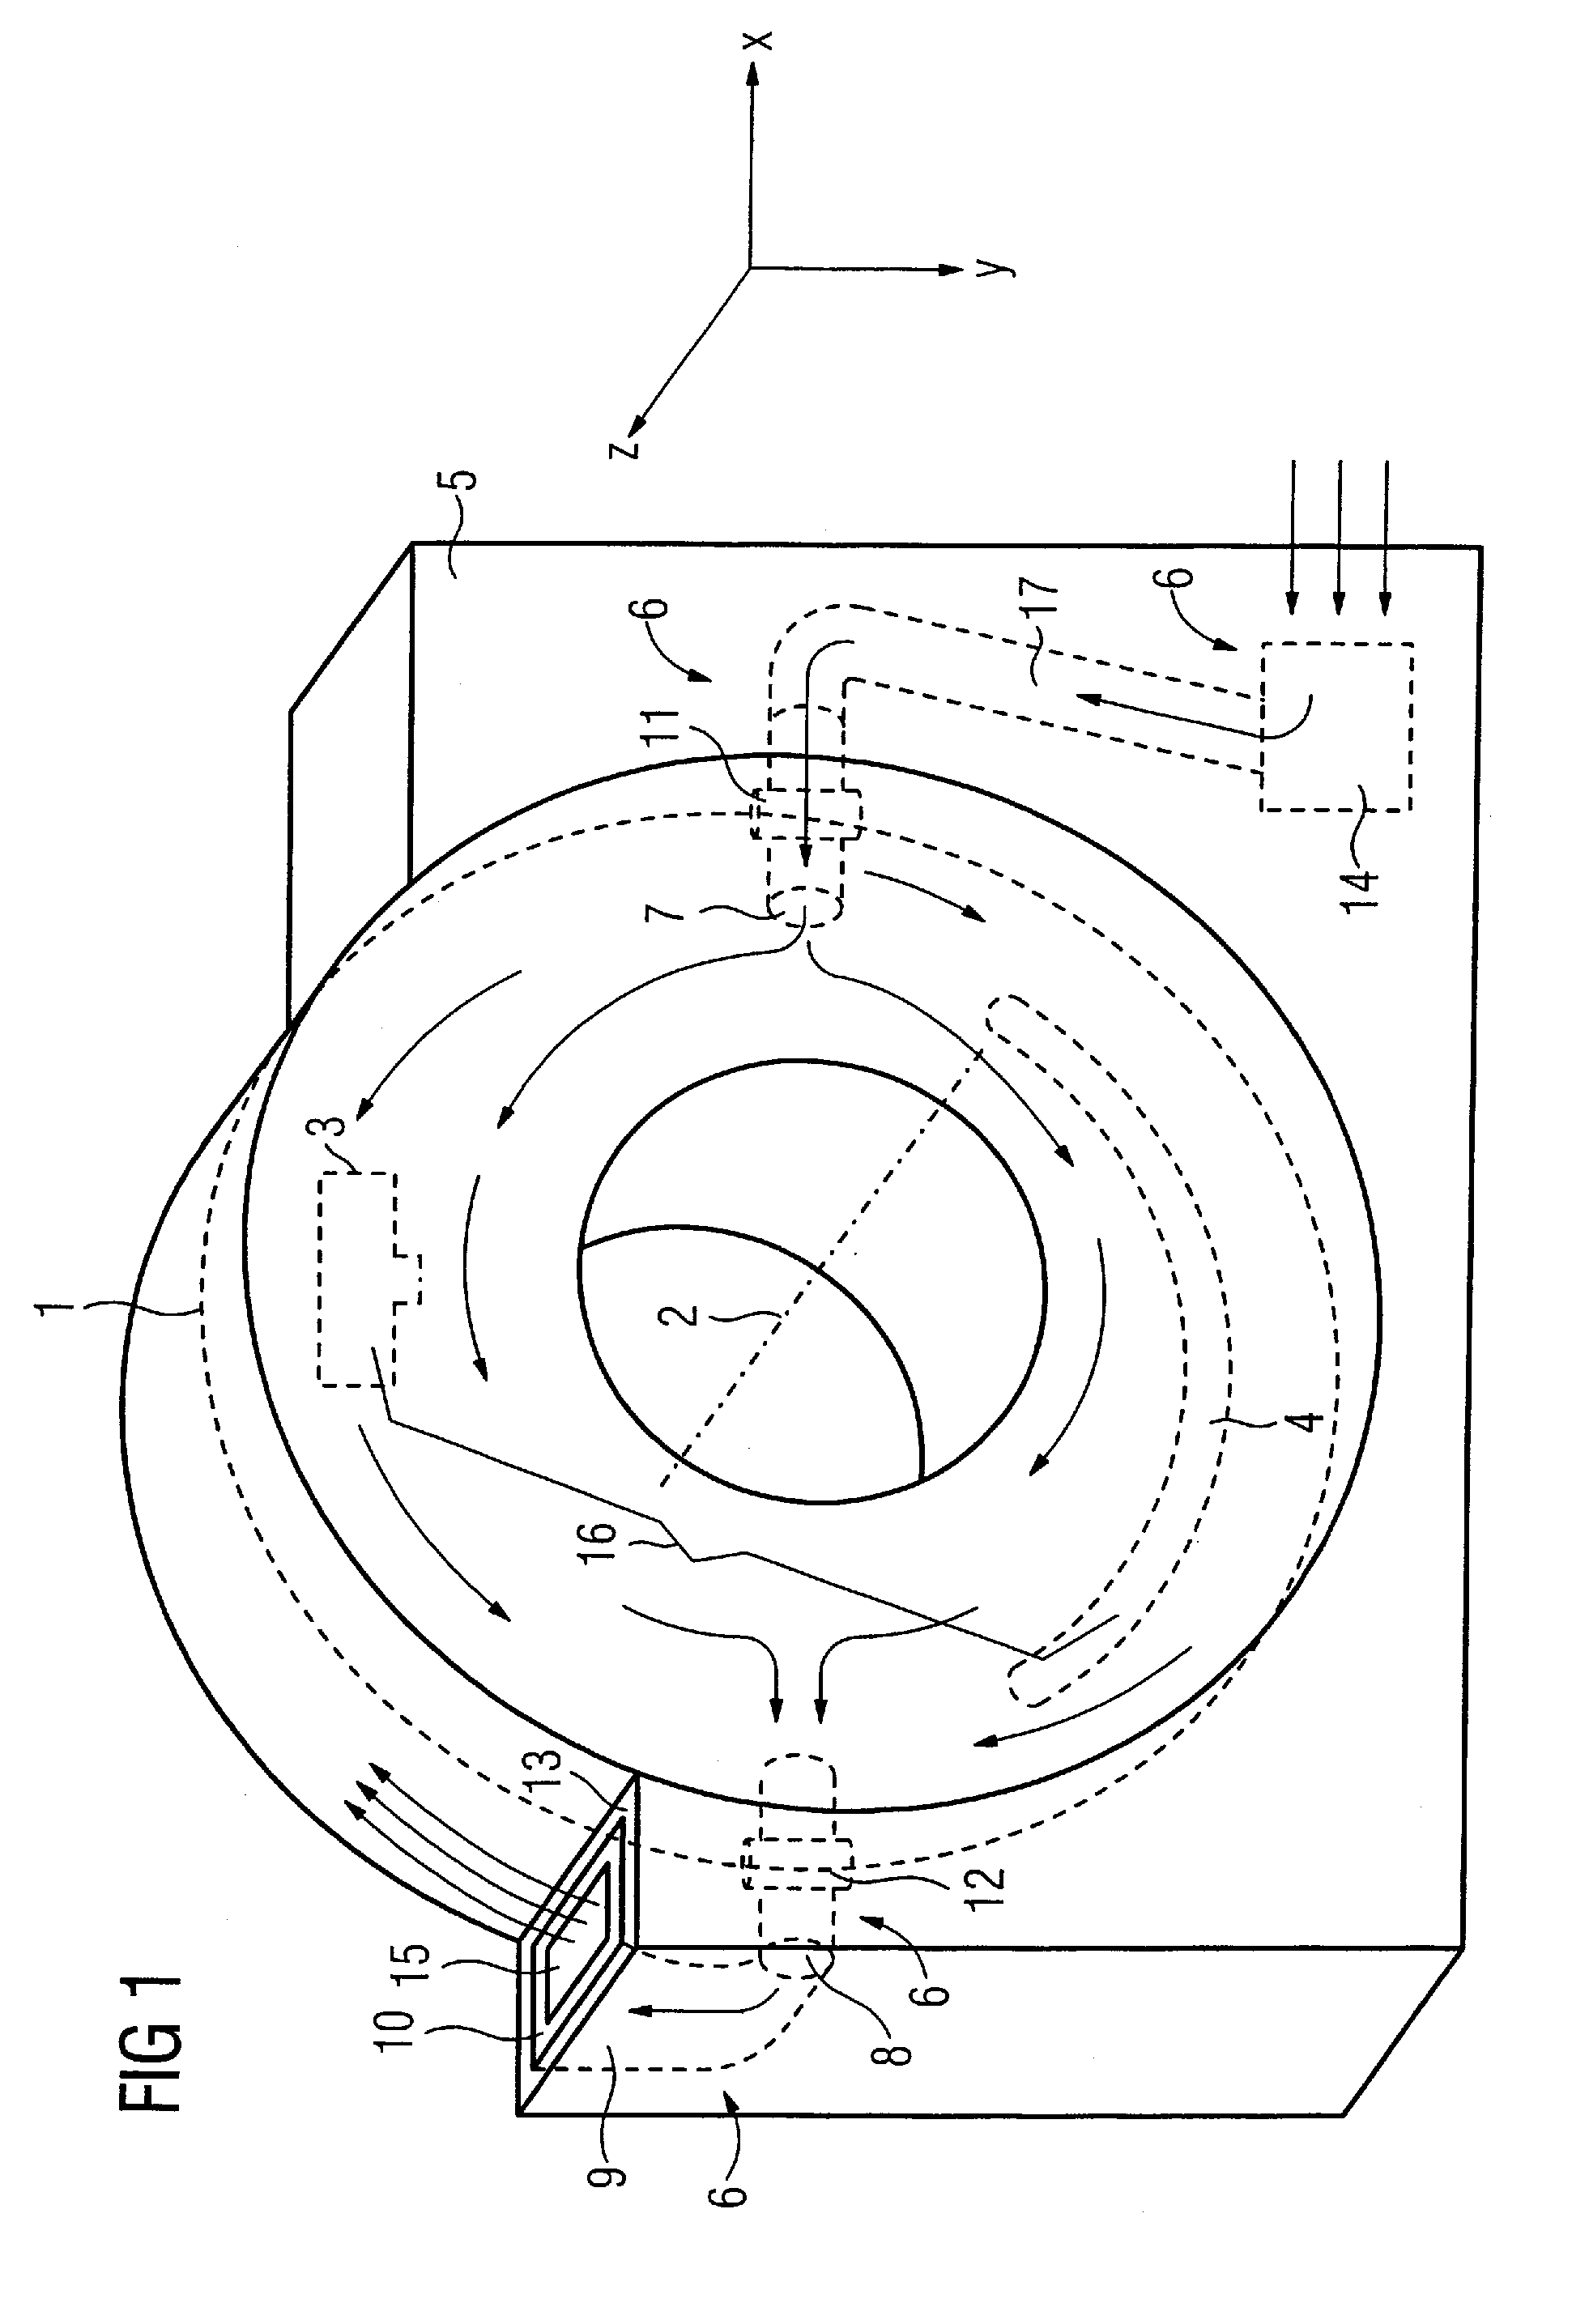 Cooling system for gantry-mounted components of a computed tomography system